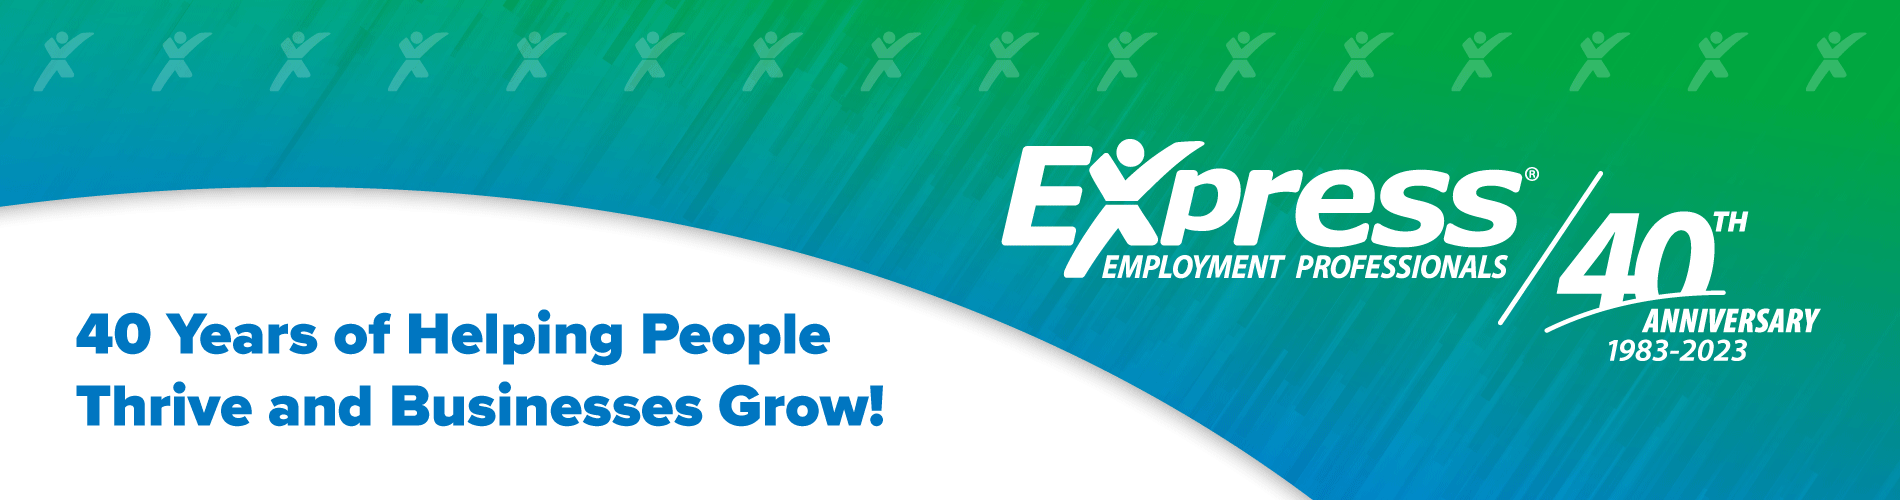 40th Anniversary - Express Employment Professionals